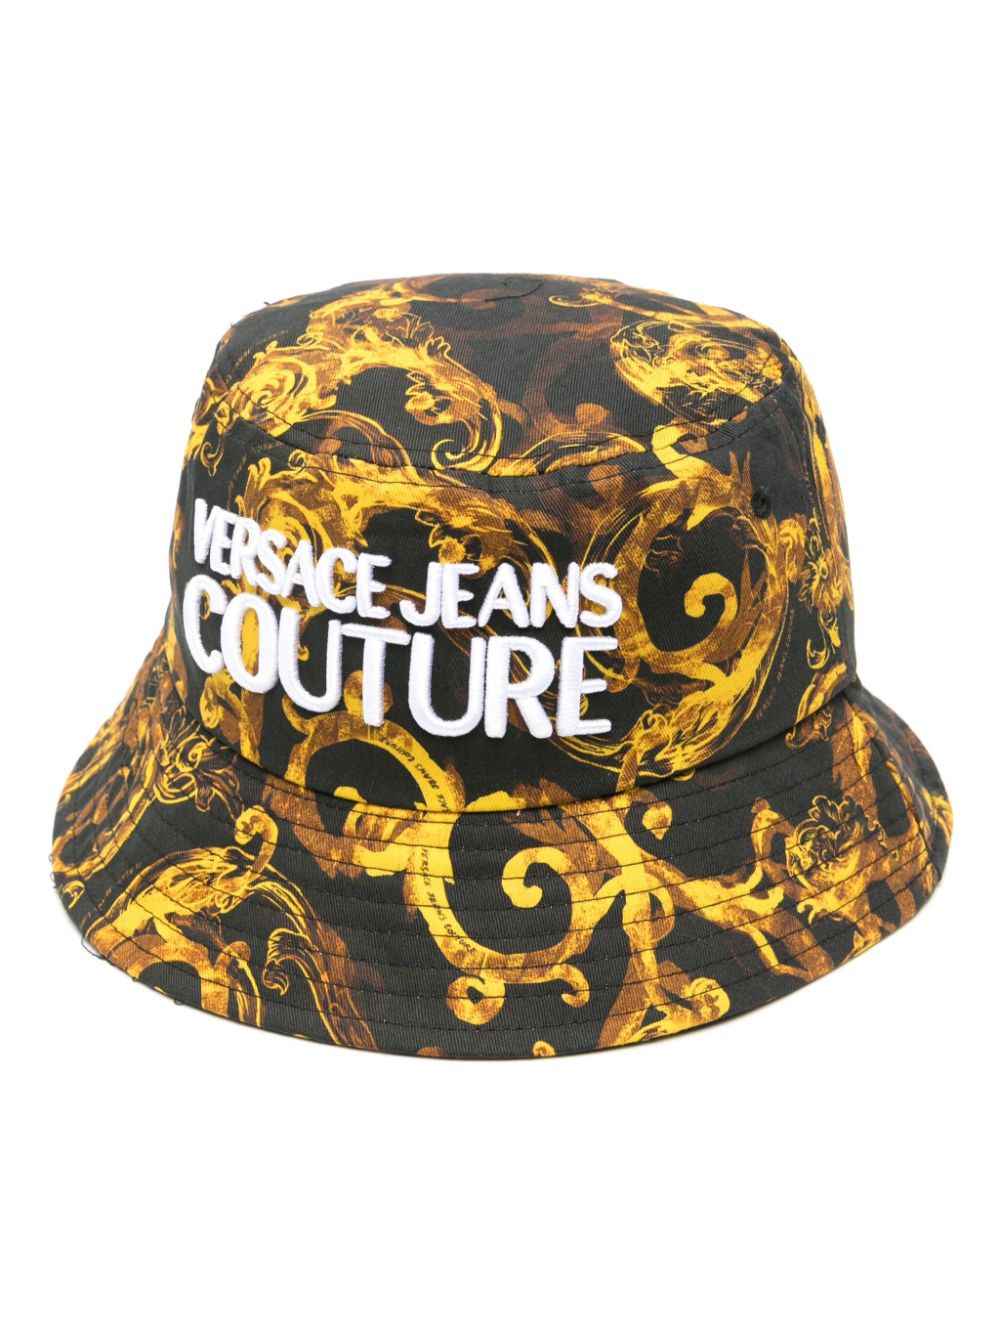 Watercolour Couture bucket hat